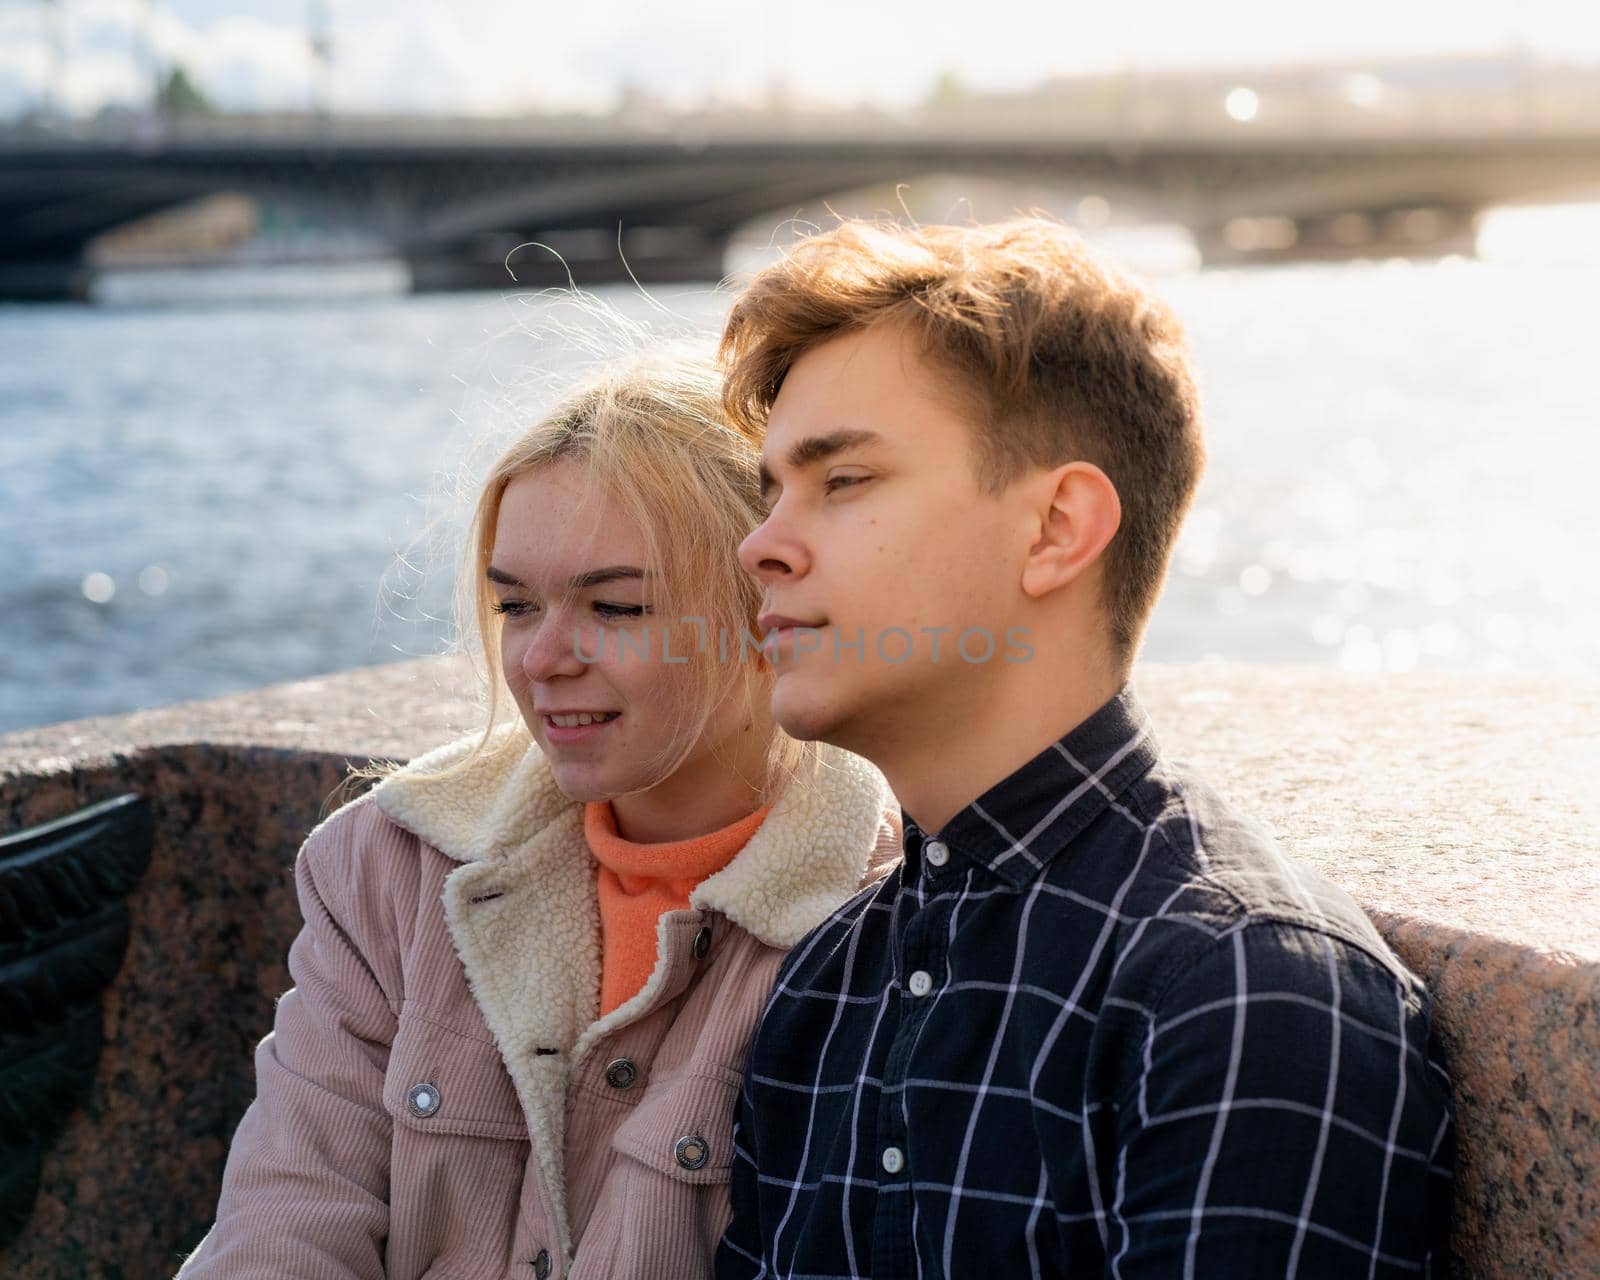 Teenagers in love sit on the waterfront in the city center, resting in the autumn sun. Concept the first teenage love, the beginning of relations. A boy and a girl meet on a date, a couple.